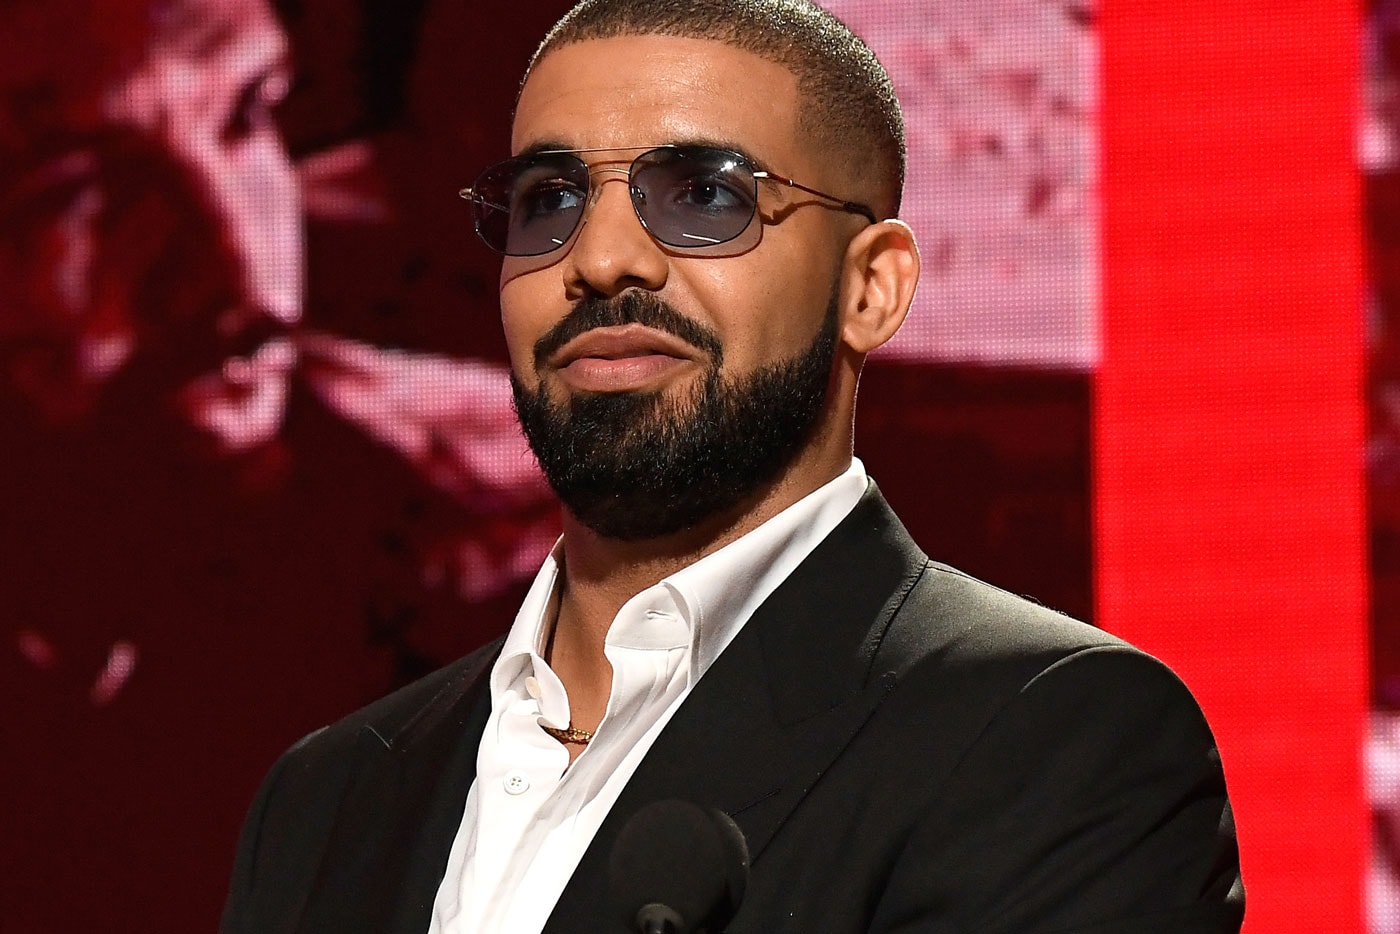 Drake's "Hotline Bling" Is Unable to Reach No. 1 on Charts